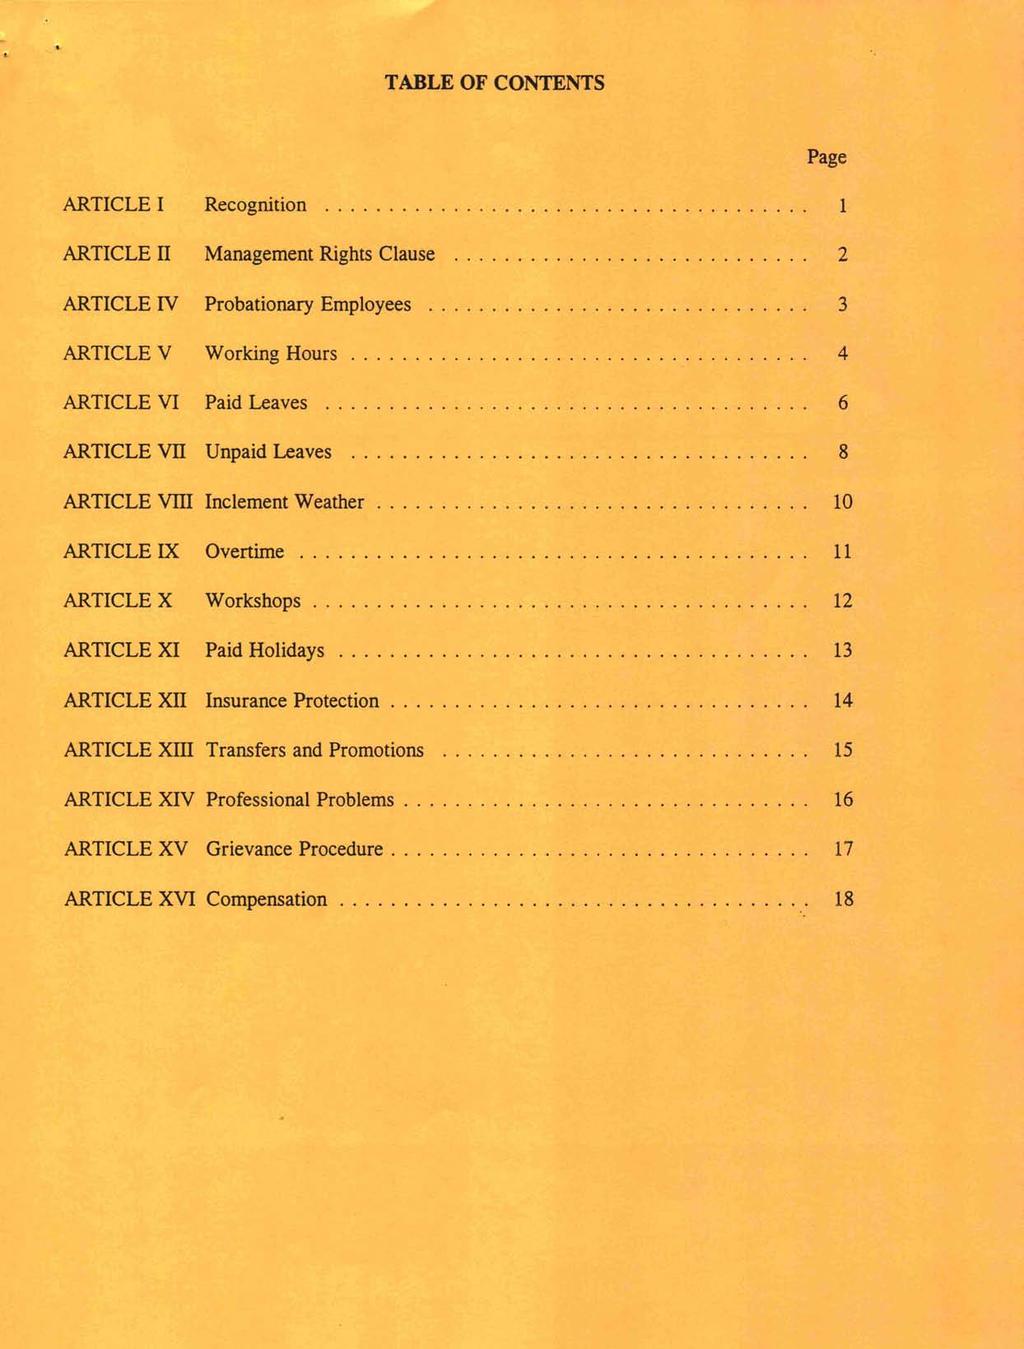 TABLE OF CONTENTS Page ARTICLE I Recognition 1 ARTICLE II Management Rights Clause. 2 ARTICLE IV Probationary Employees. 3 ARTICLE V Working Hours '.'. 4 ARTICLE VI Paid Leaves.